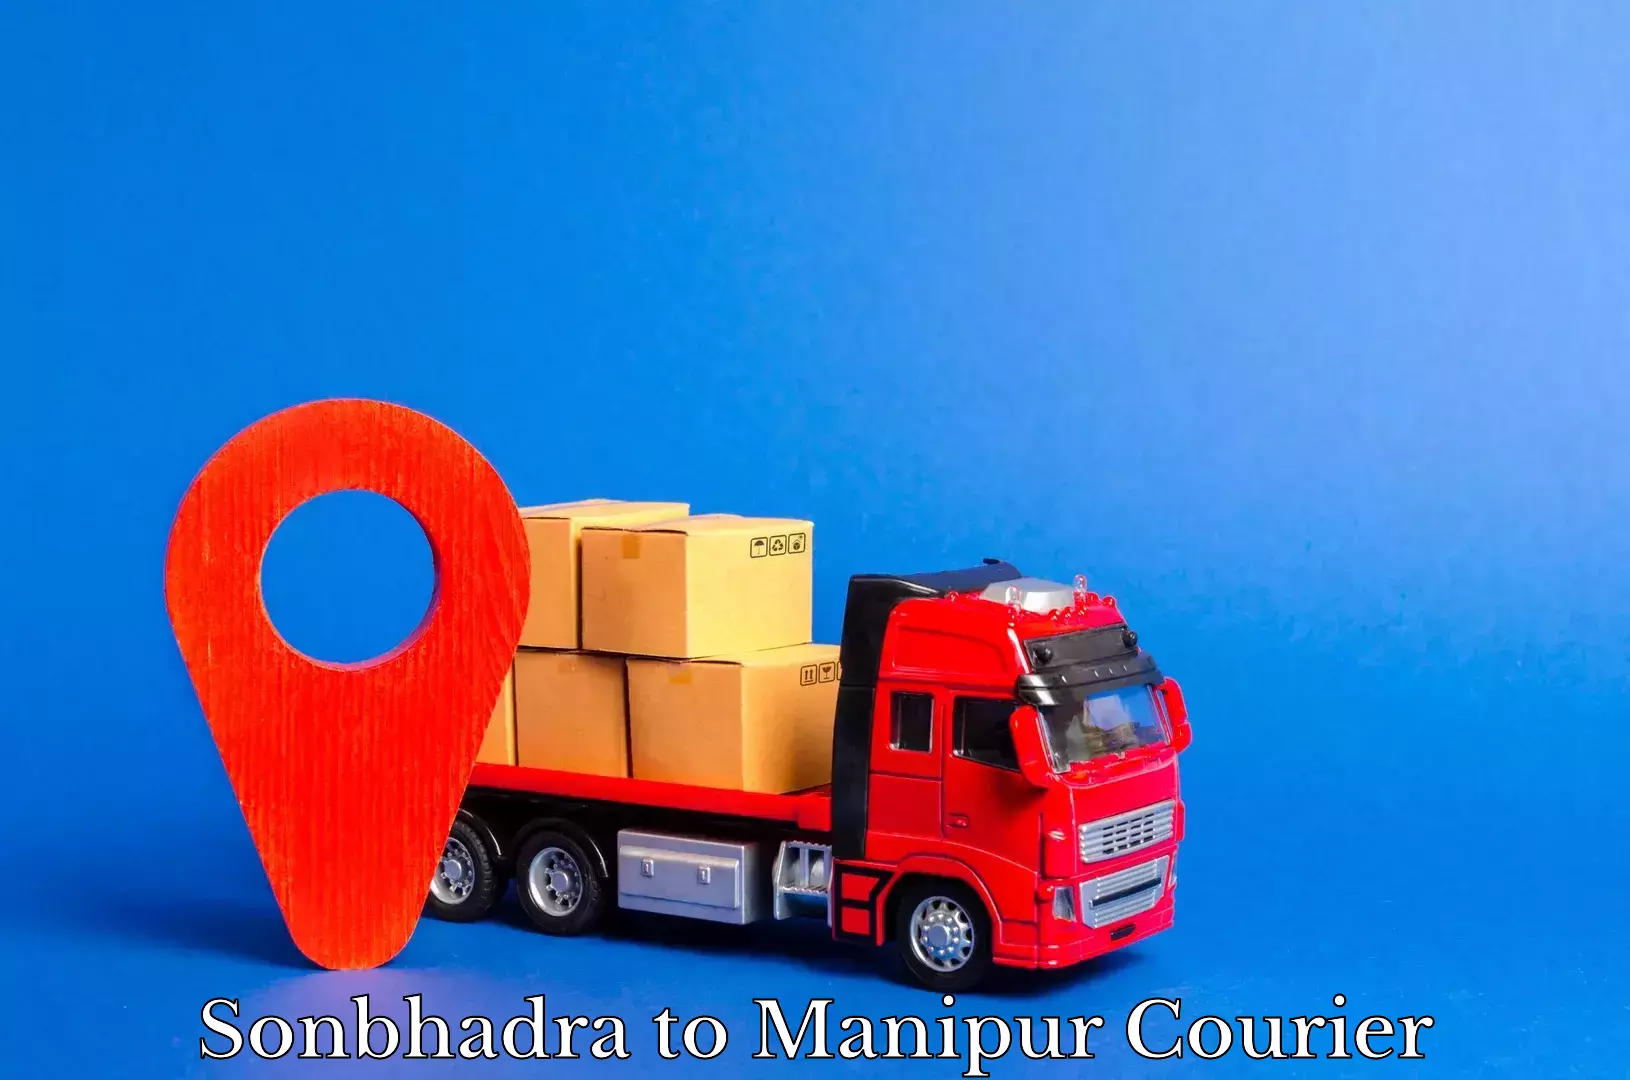 Express delivery network Sonbhadra to Manipur